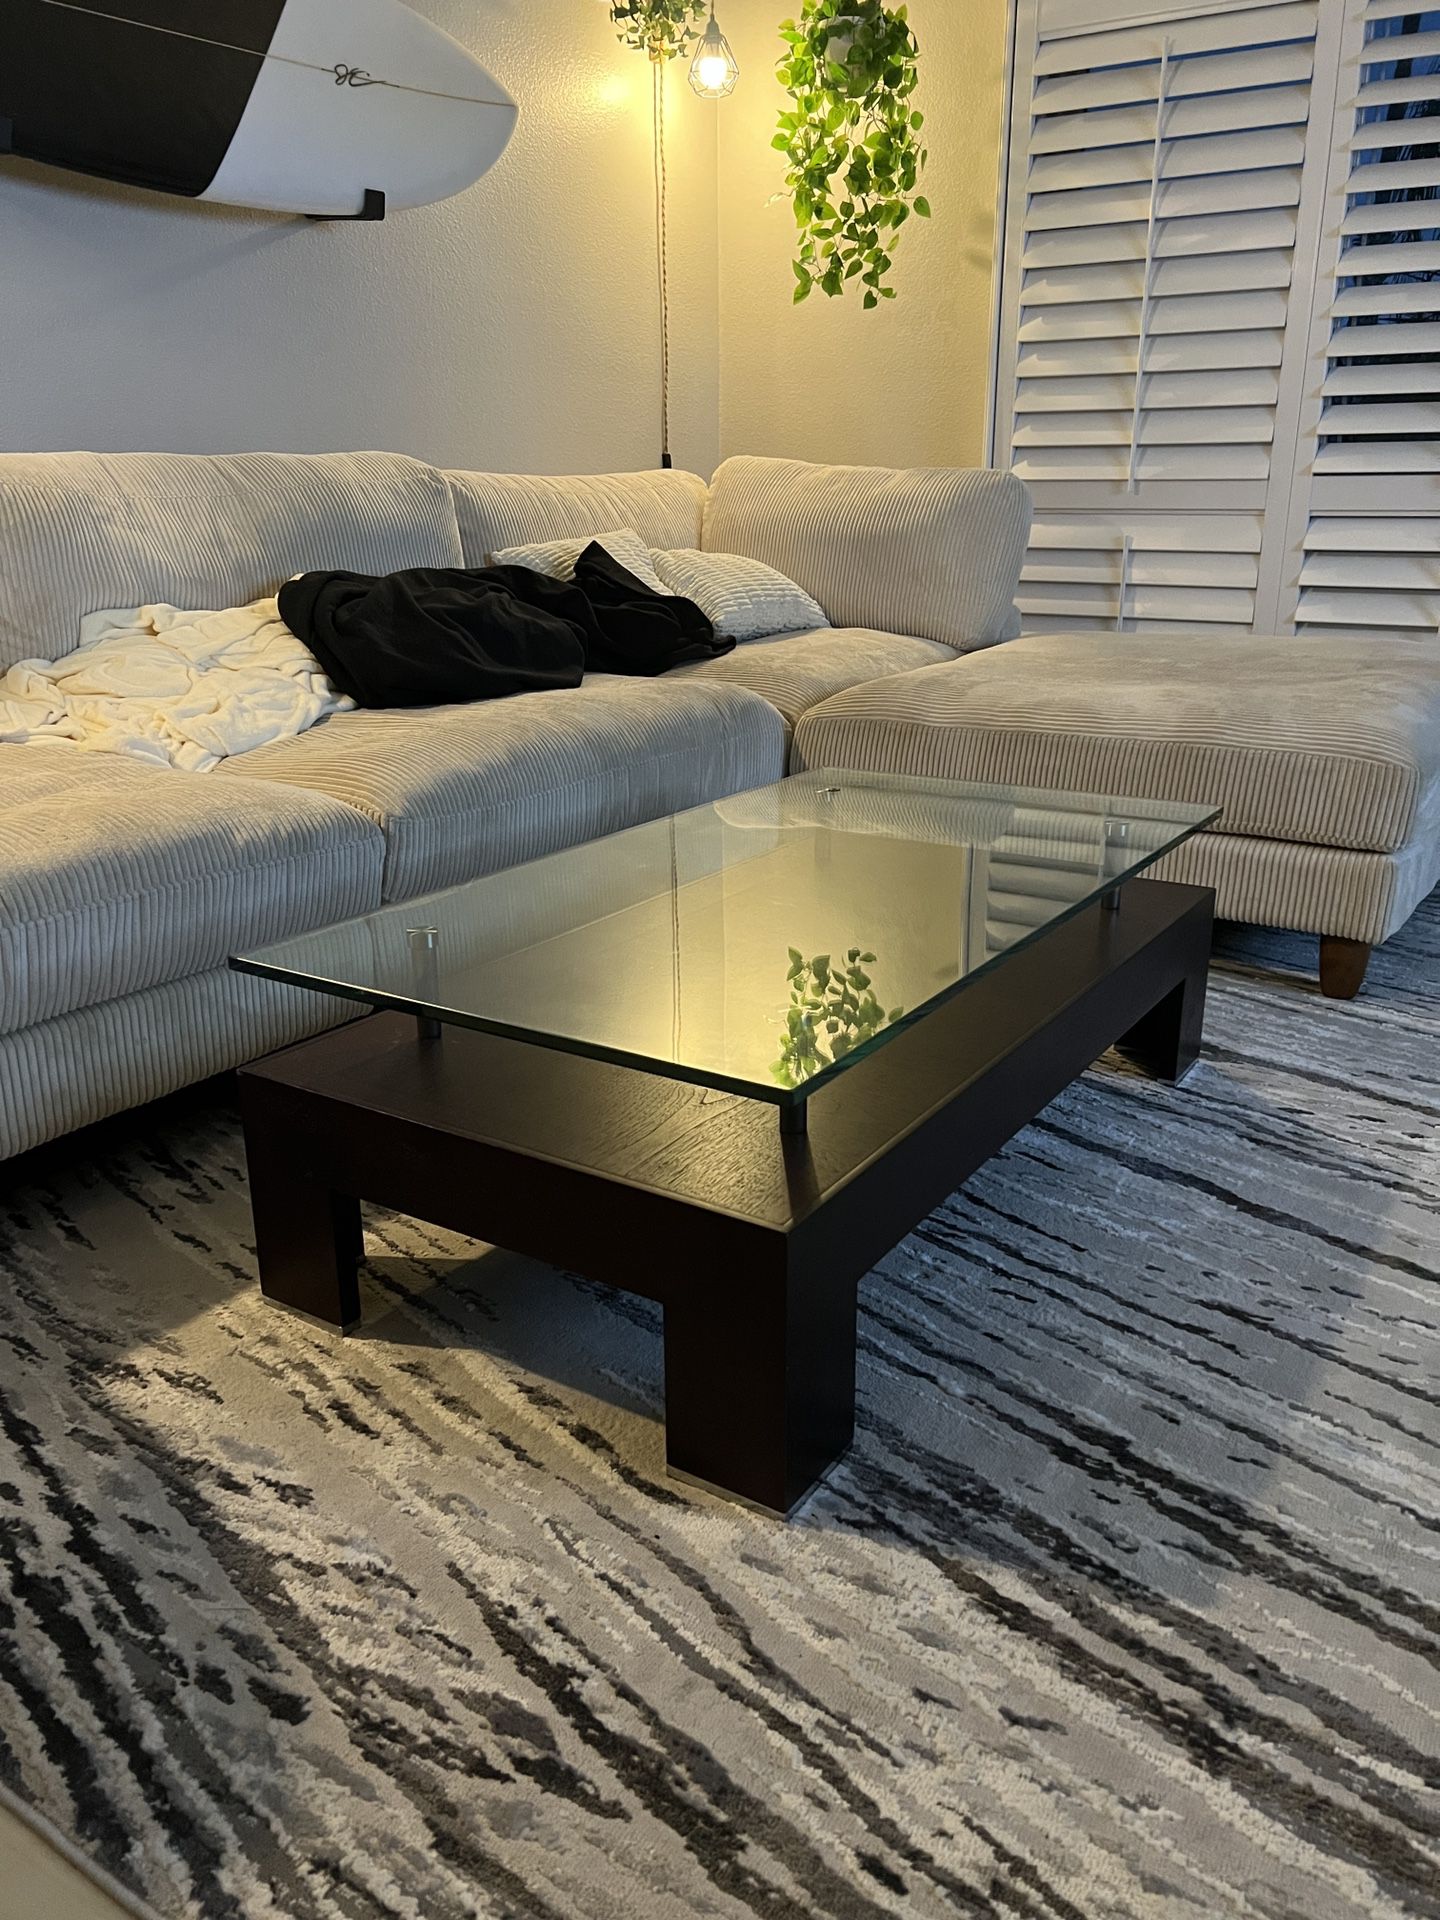 Awesome glass coffee table